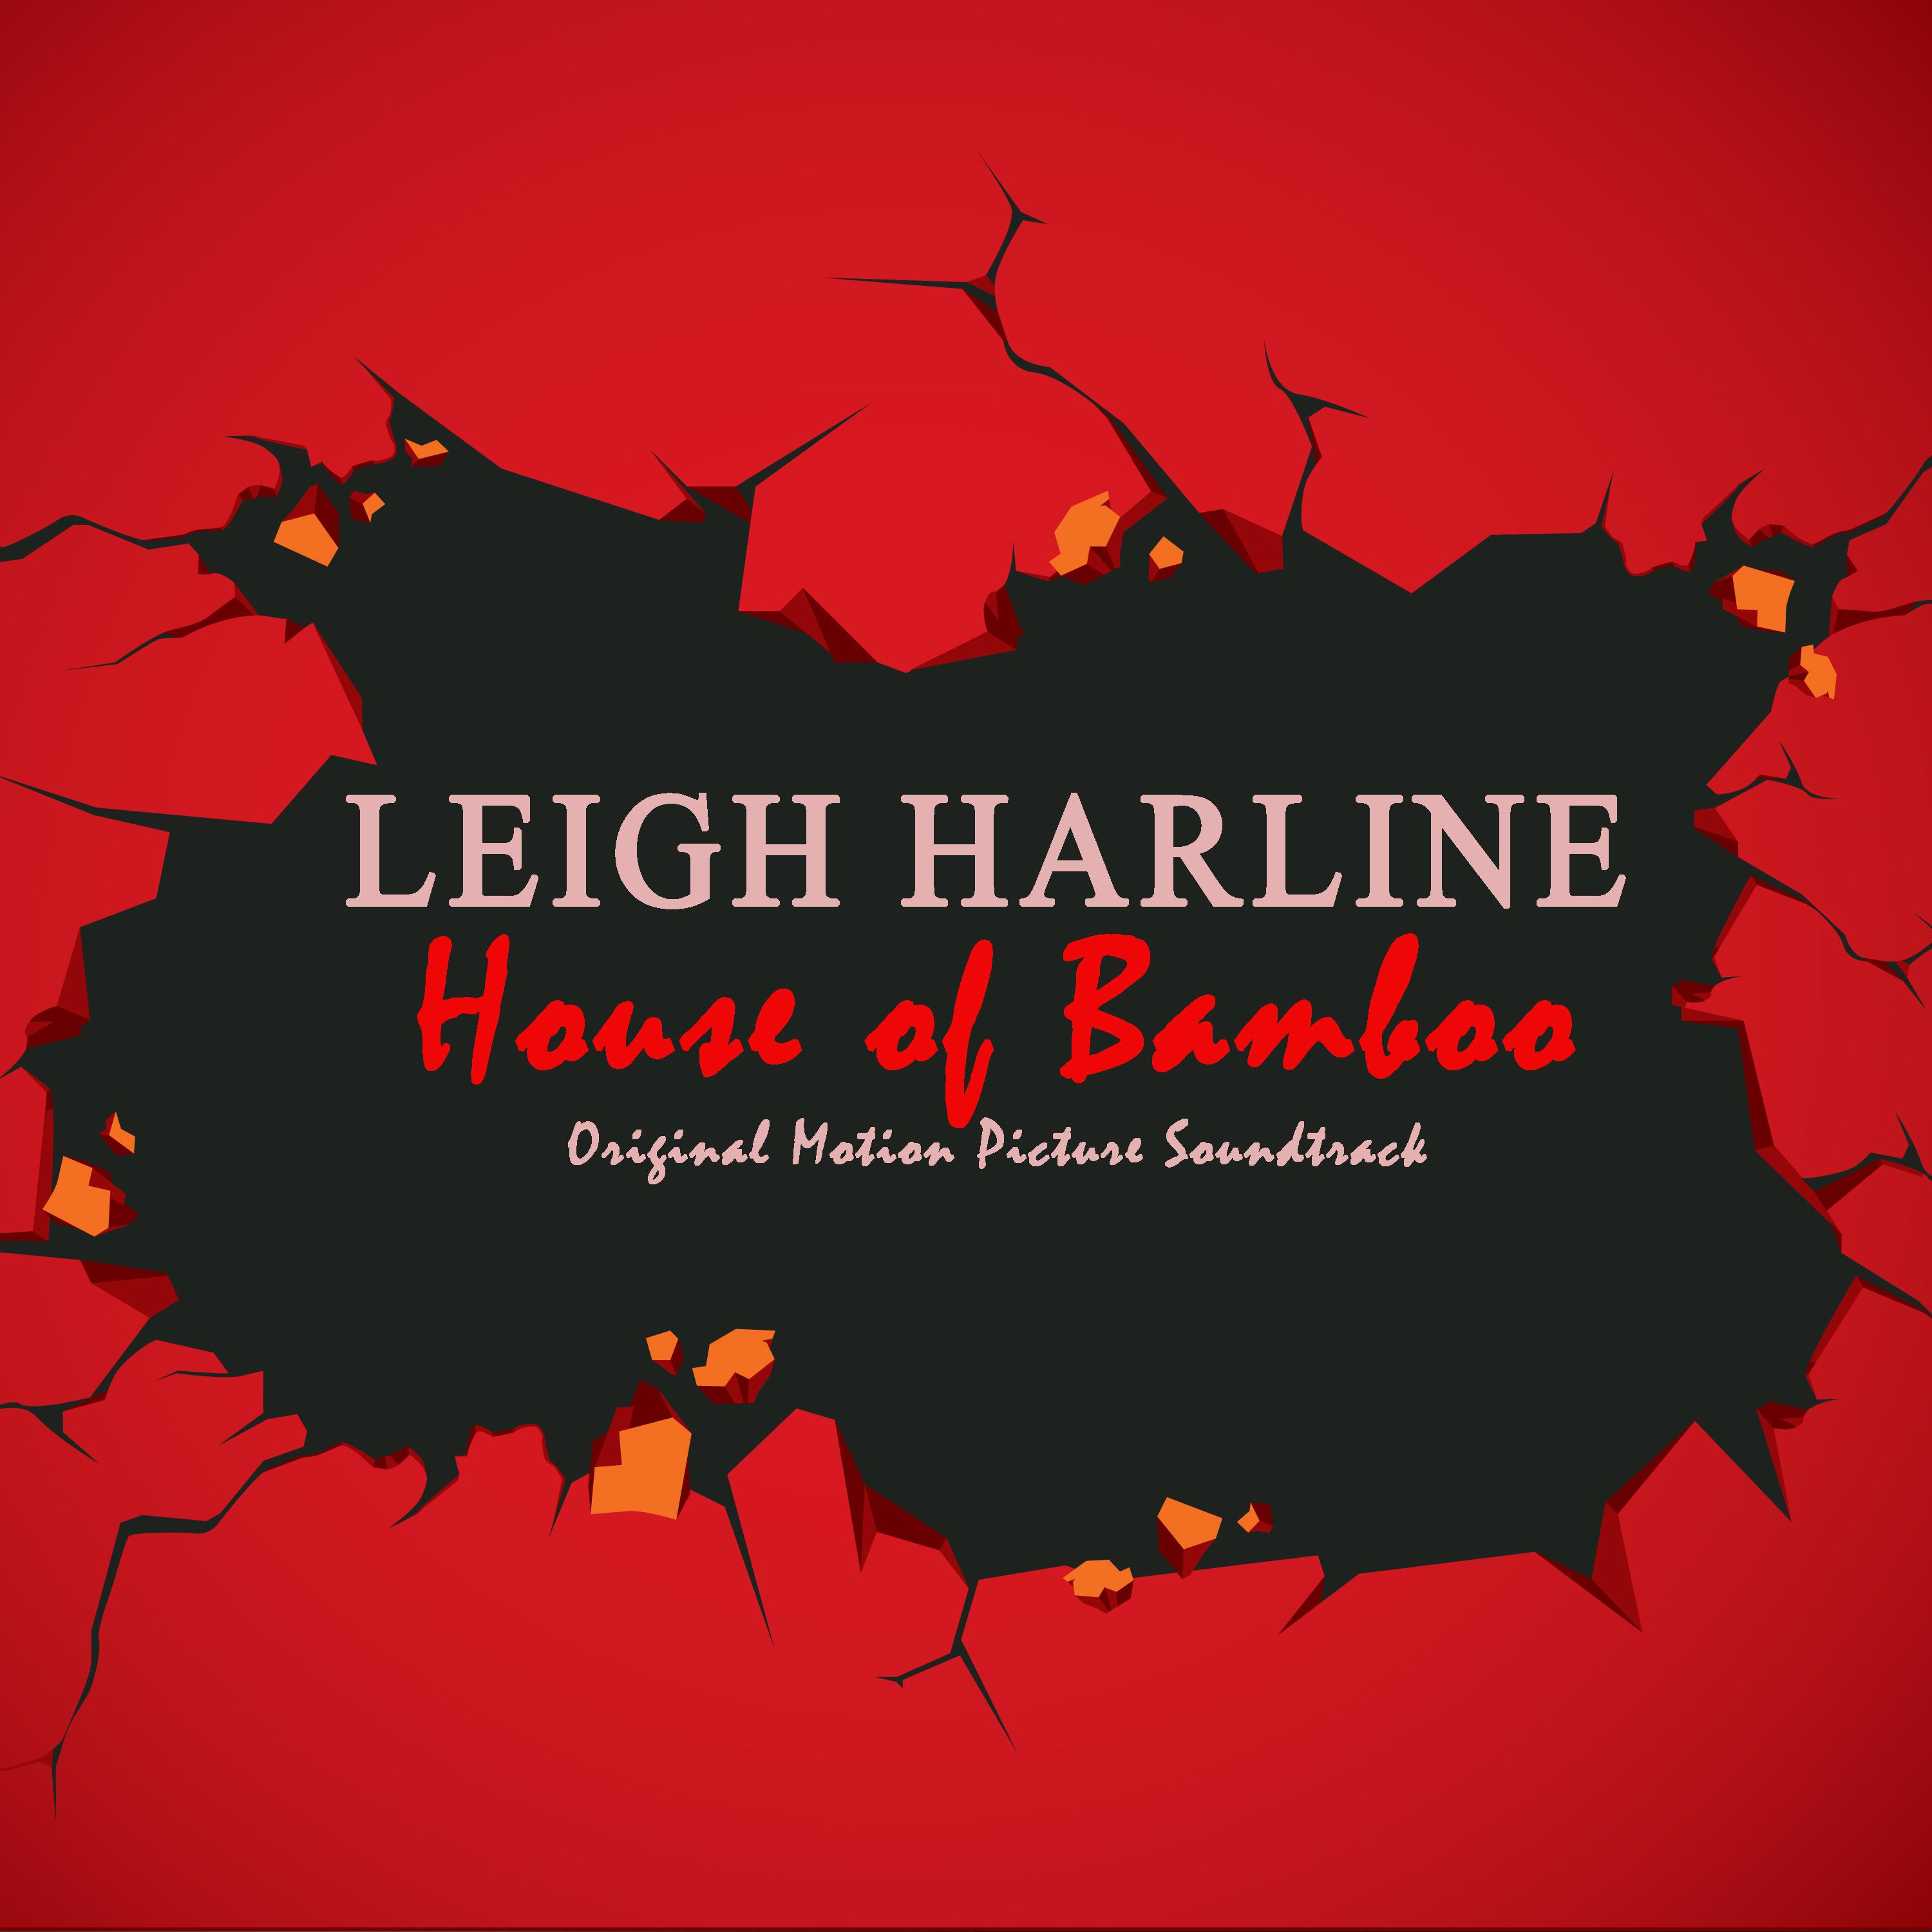 Leigh Harline - Meeting Place